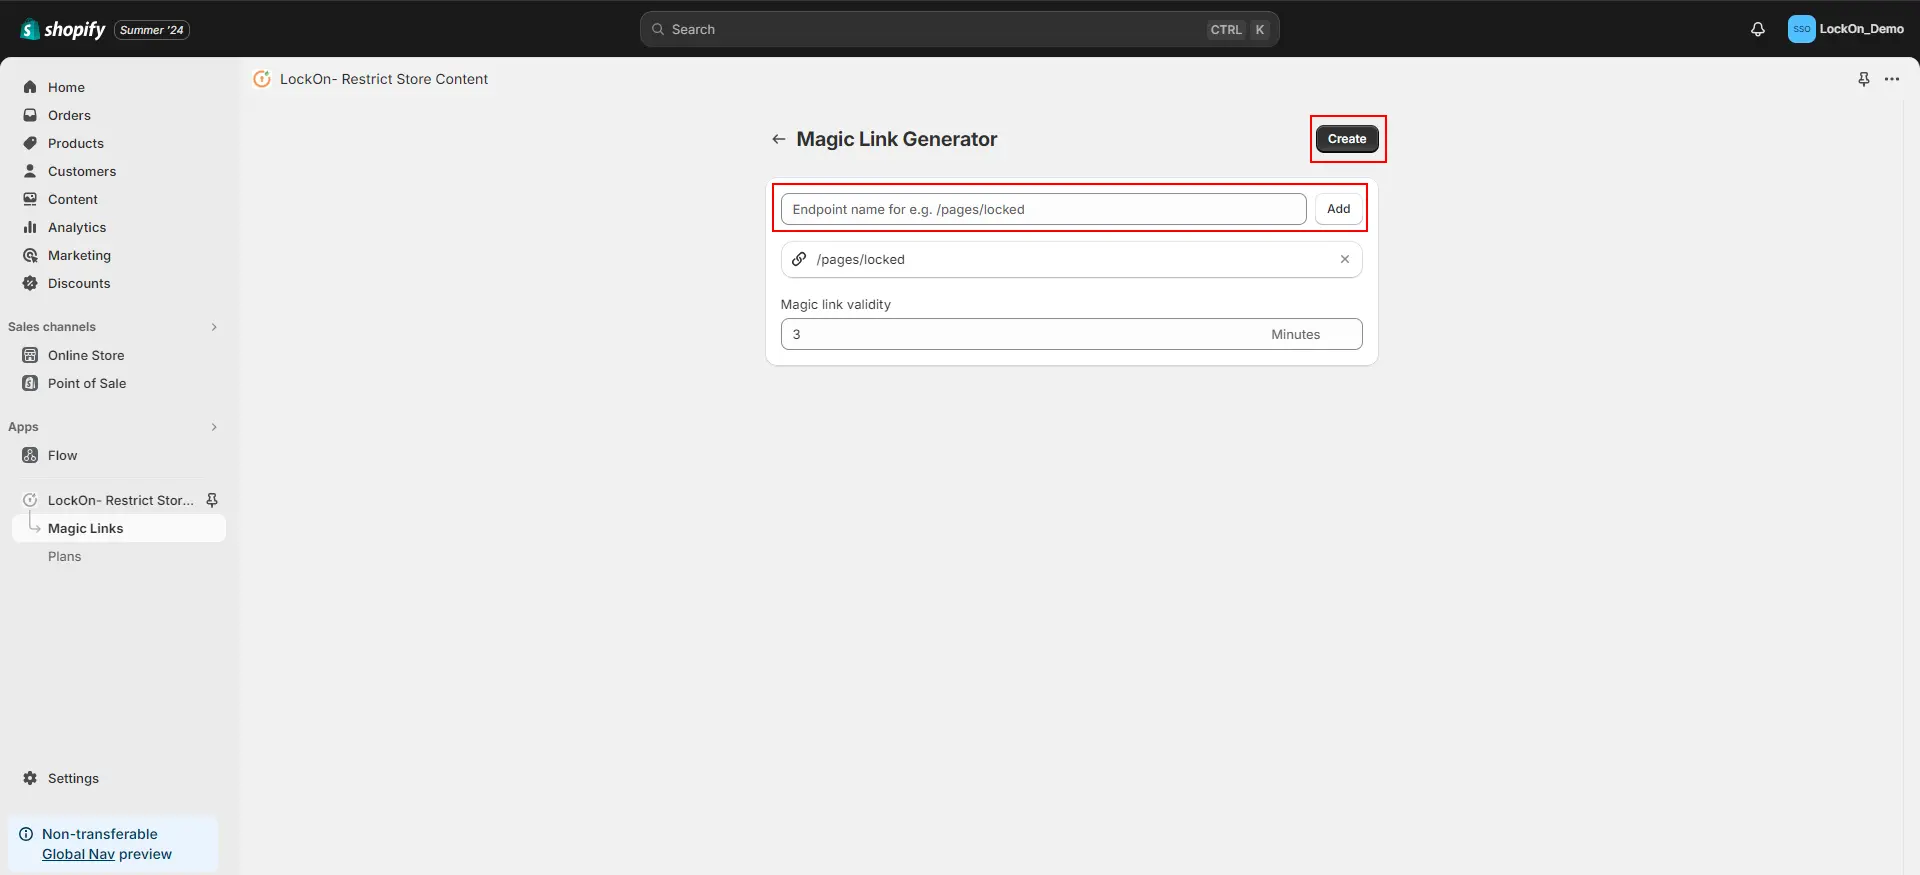 Shopify LockOn Restrict Content Application - Enter the endpoint name for magic link